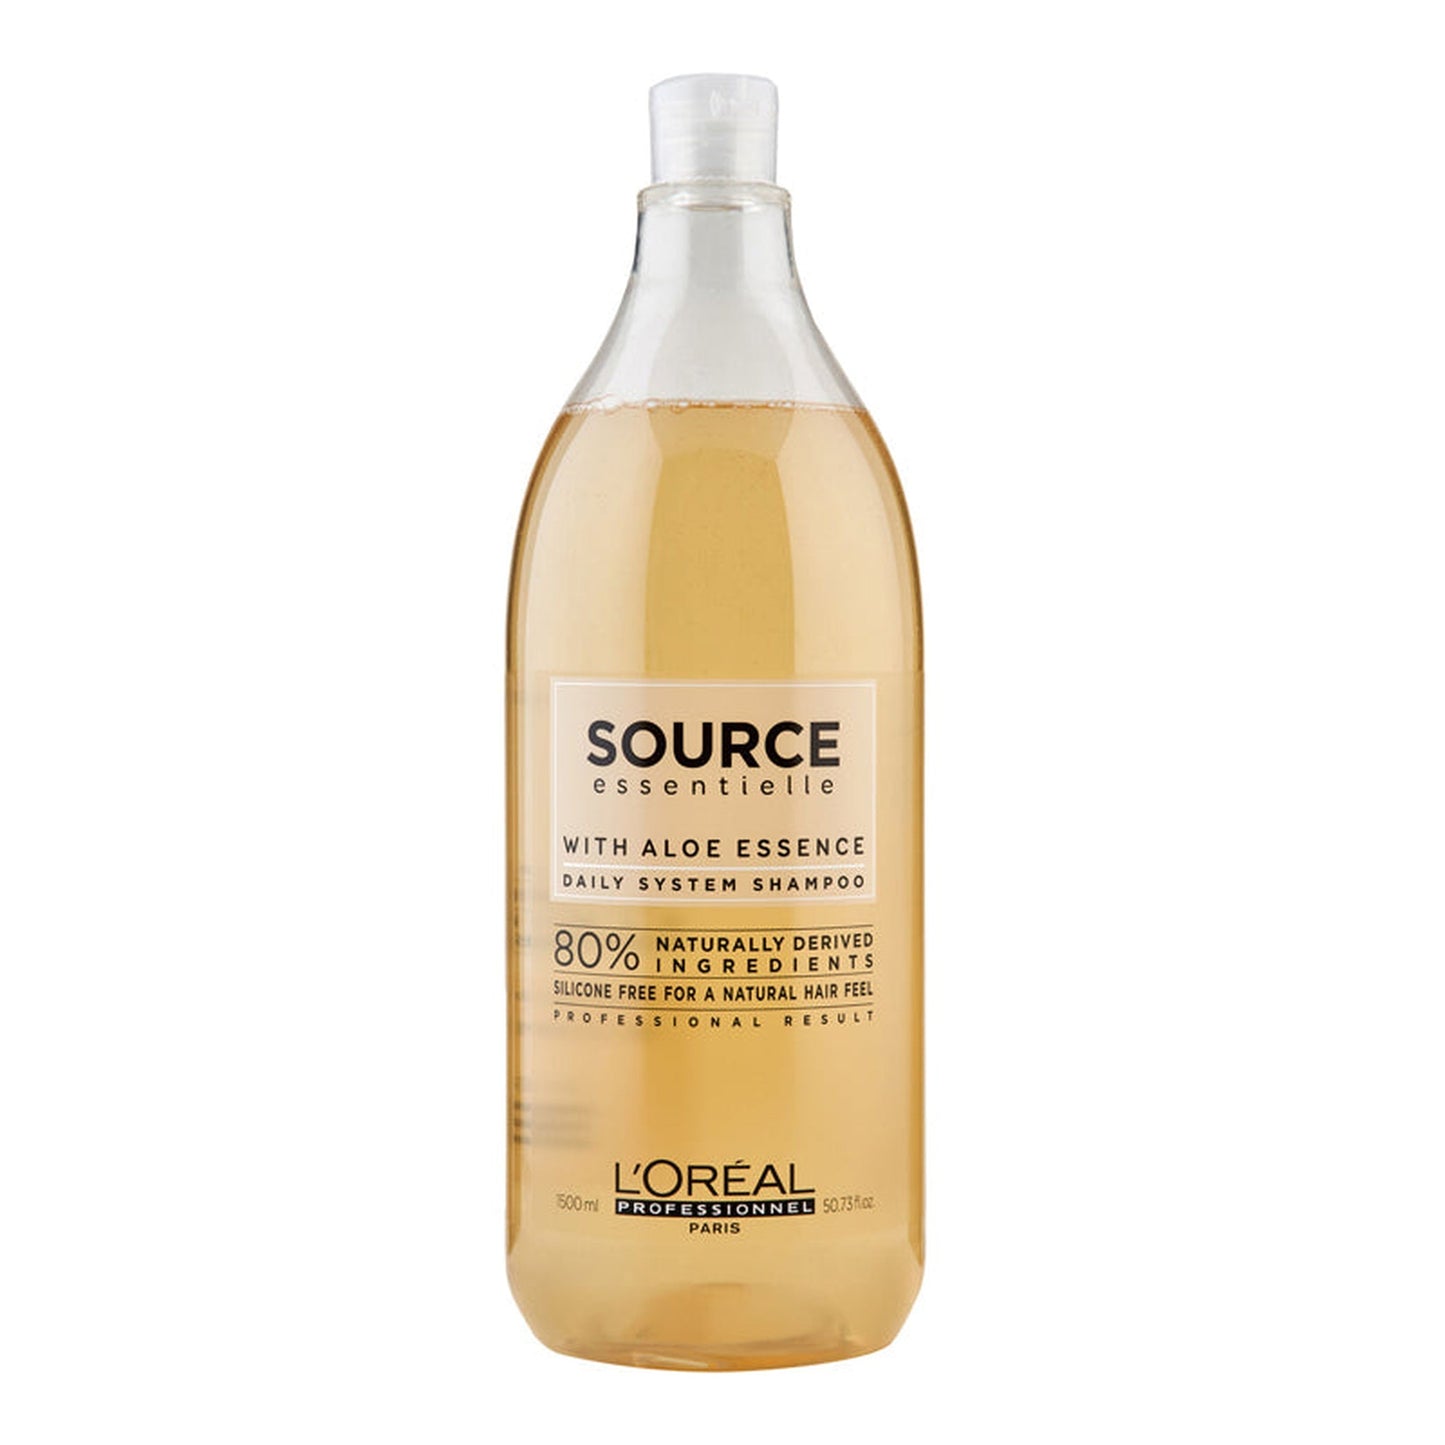 Loreal Professional Source Essentielle Daily System Shampoo 1500mL-L'Oreal-BeautyNmakeup.co.uk